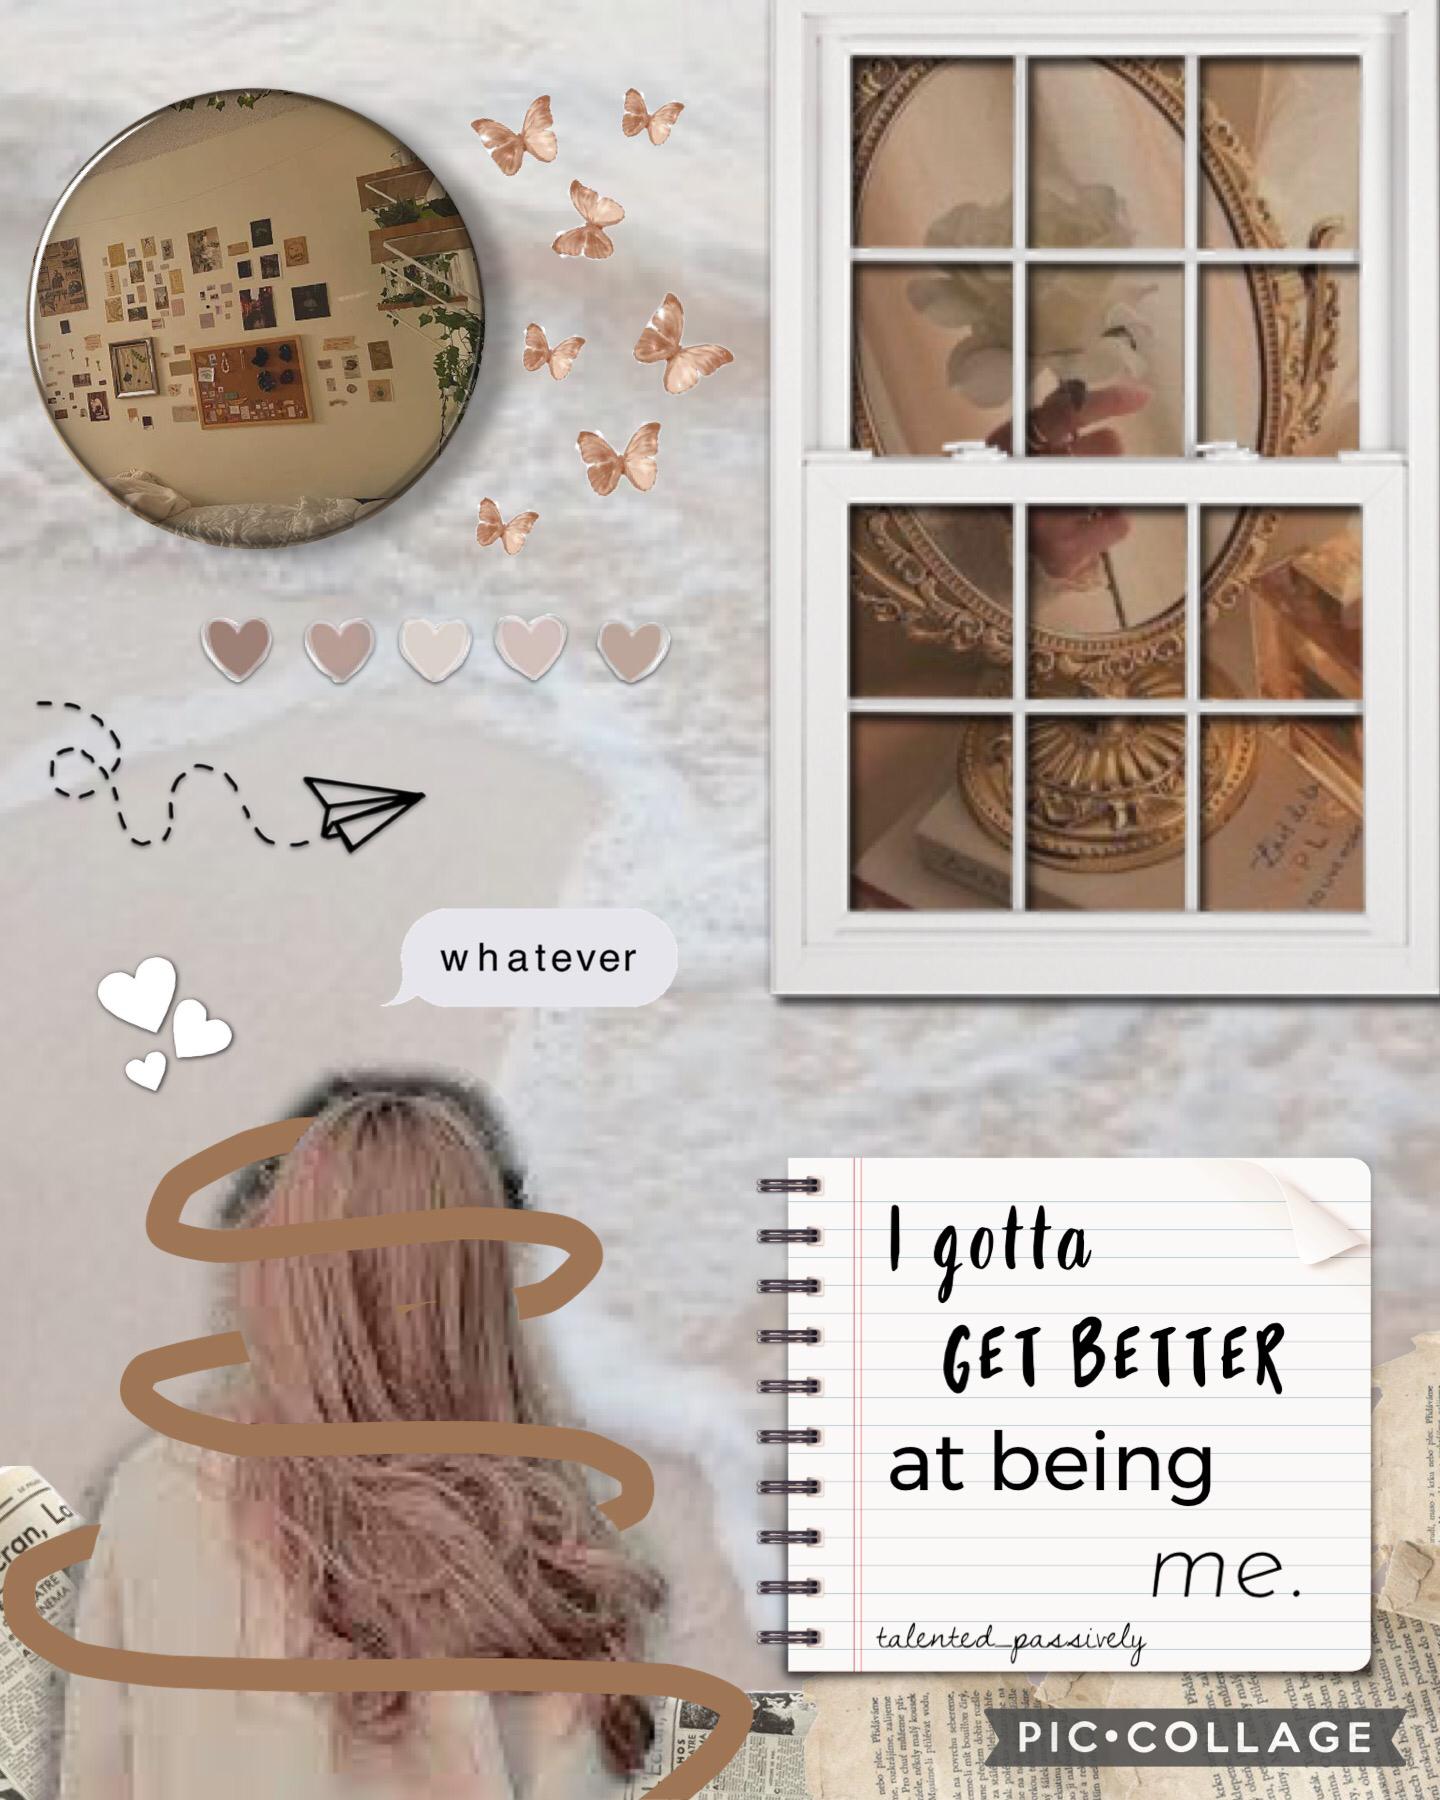 🪩 29/8/22 (t a p) 🪩 
~ hello! I made this in math class (which I’m still in) ~
~ it’s hard to find inspo for this theme and I’m switching my theme up when I reach 700 so I can’t wait! ~
~ qotd: hair ribbons or hair clips aotd: hair ribbons! 🎀 ~